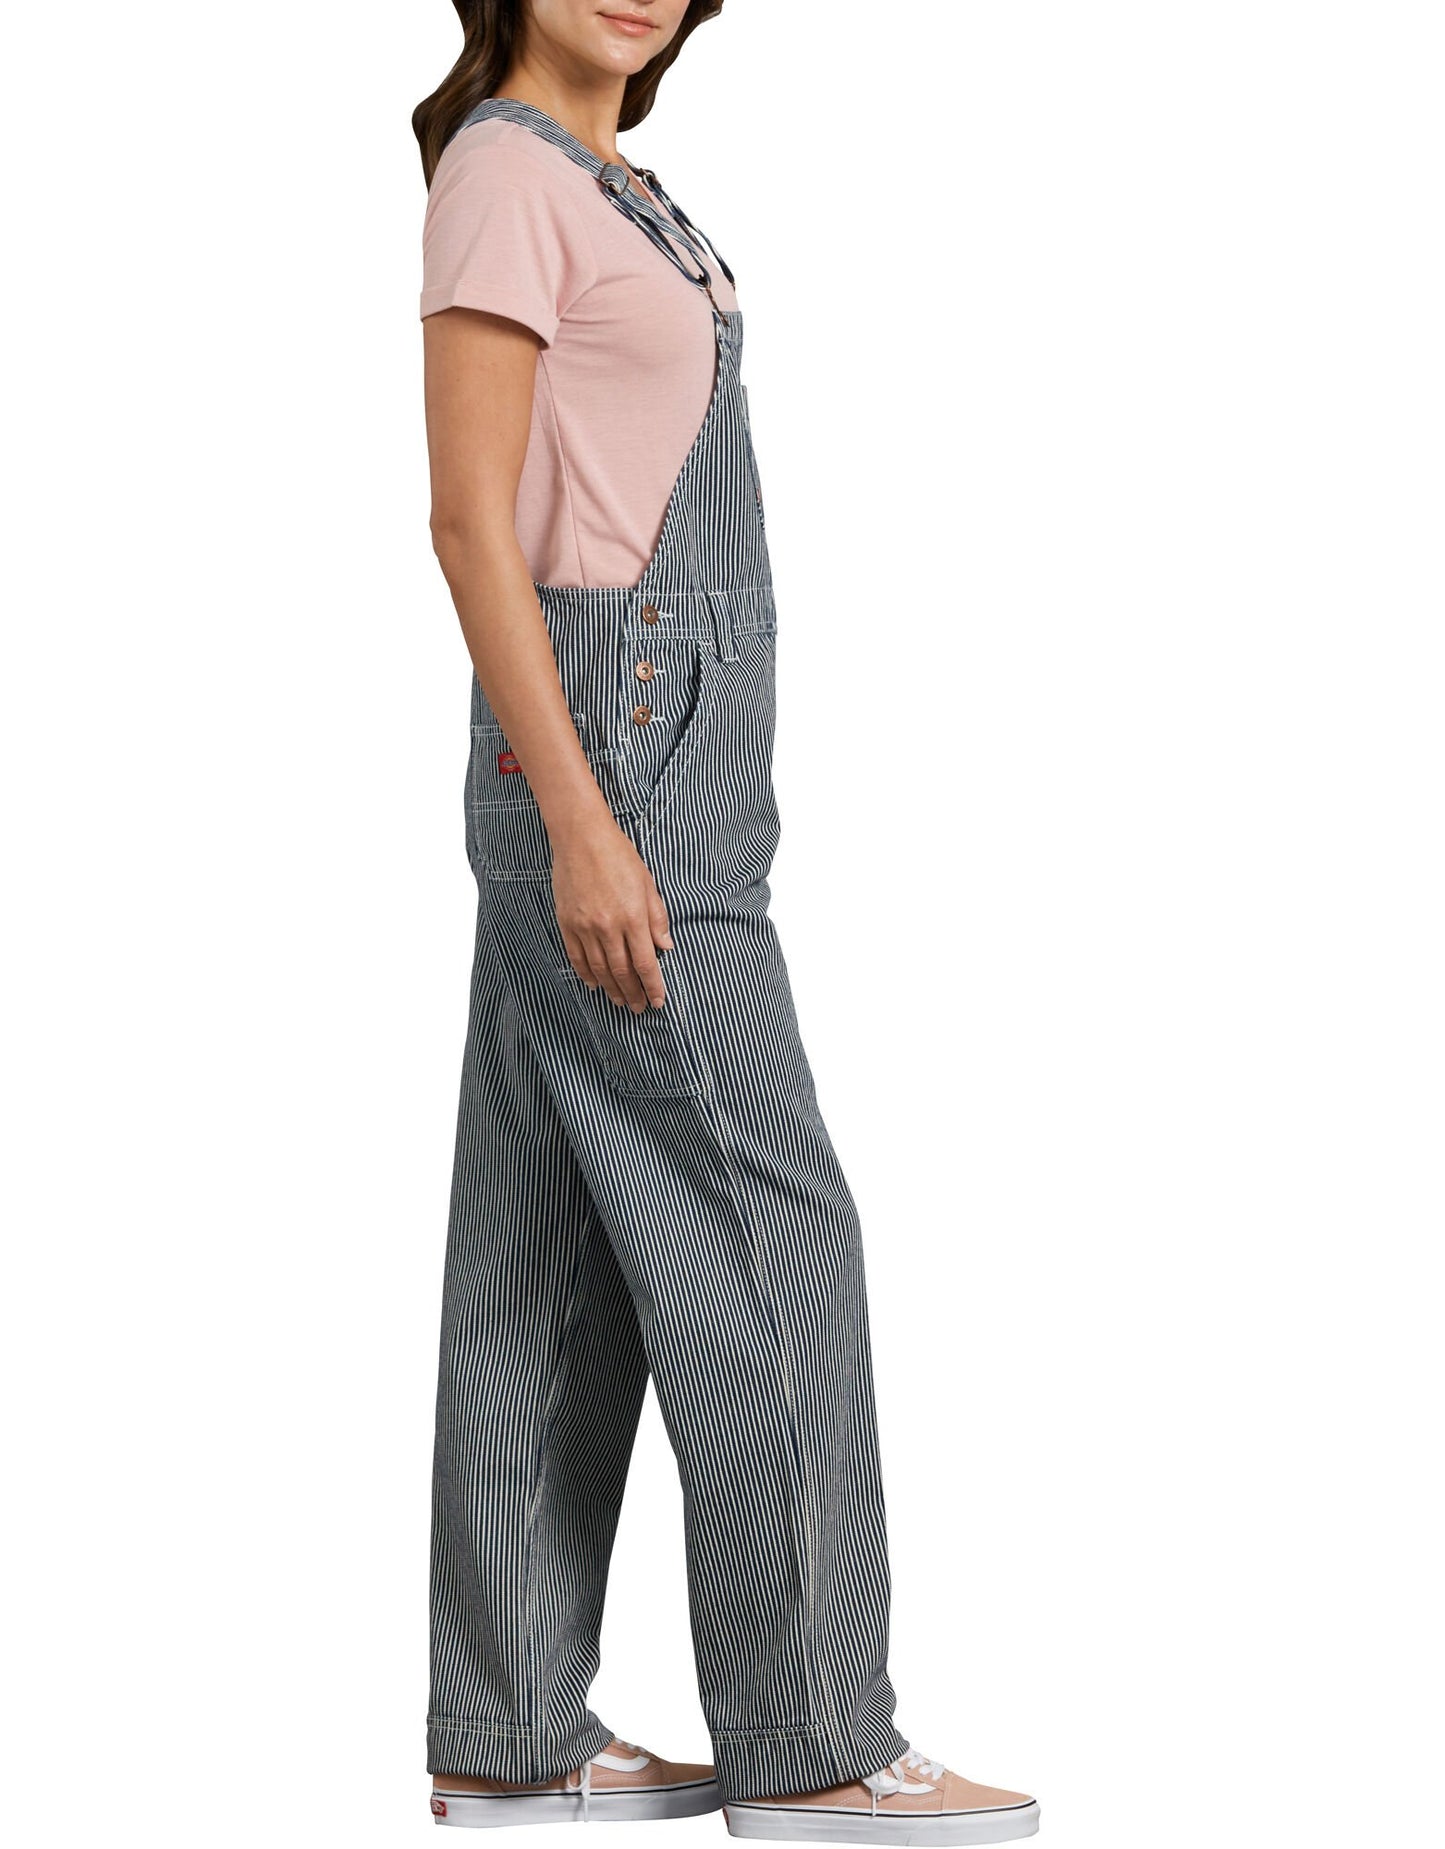 Women's Relaxed Fit Bib Overalls FB206 - Rinsed Hickory Stripe